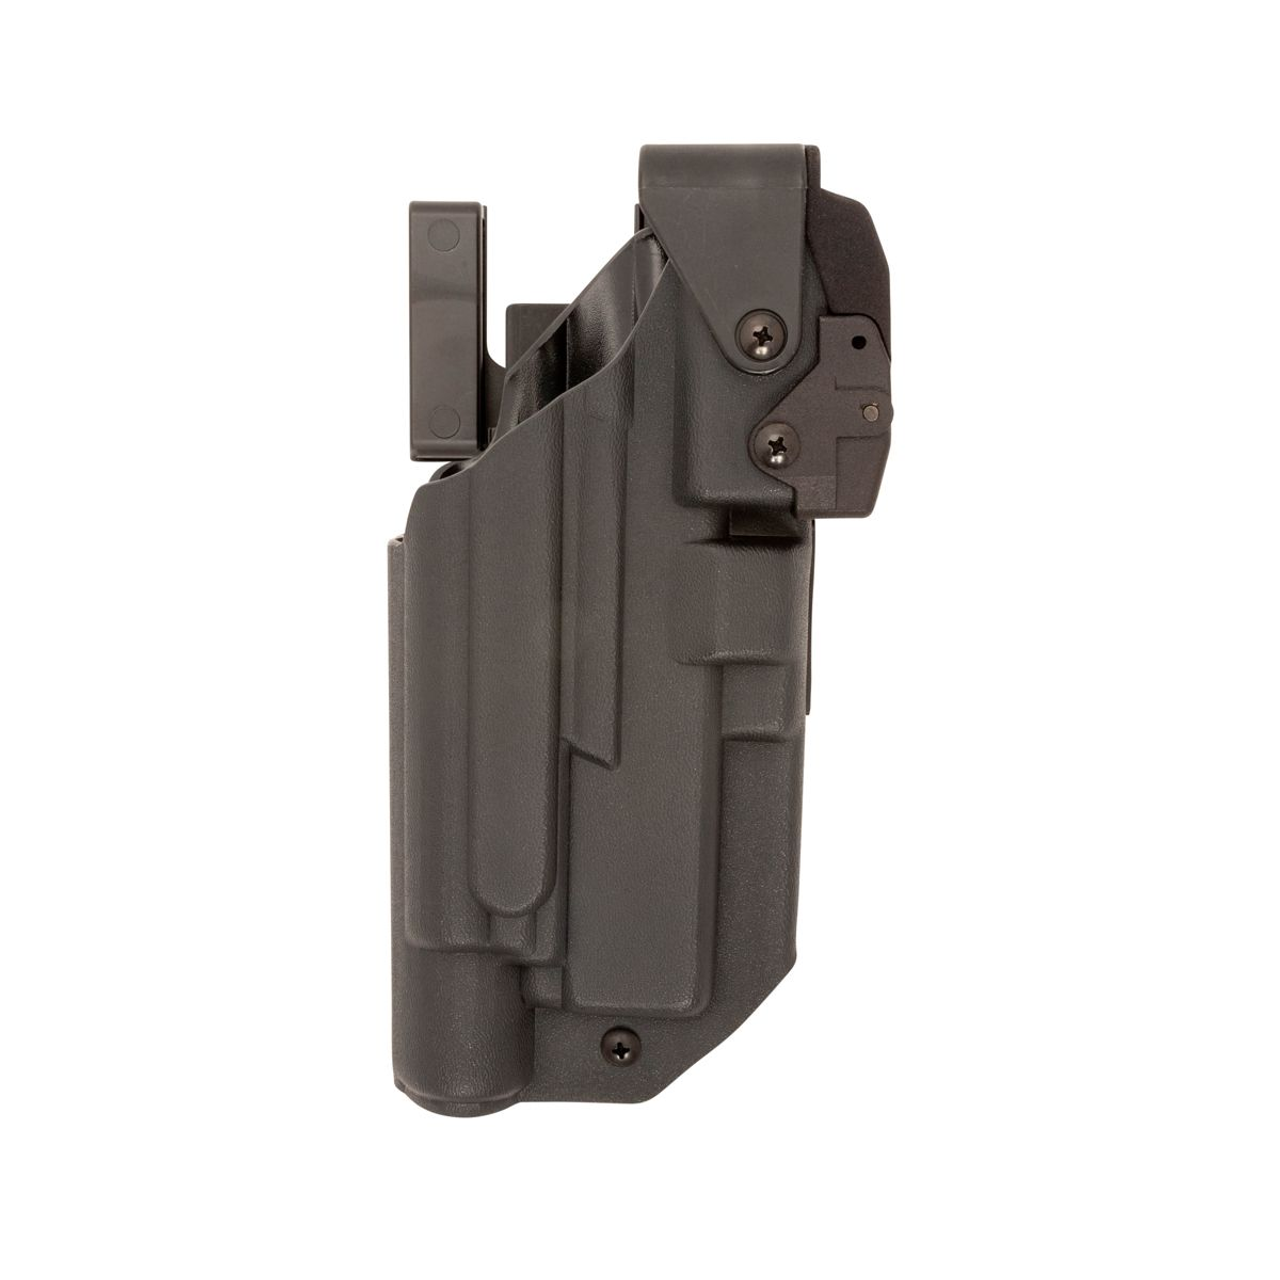 TG3C Tactical Holster - Versatile & Easy-to-Use Design